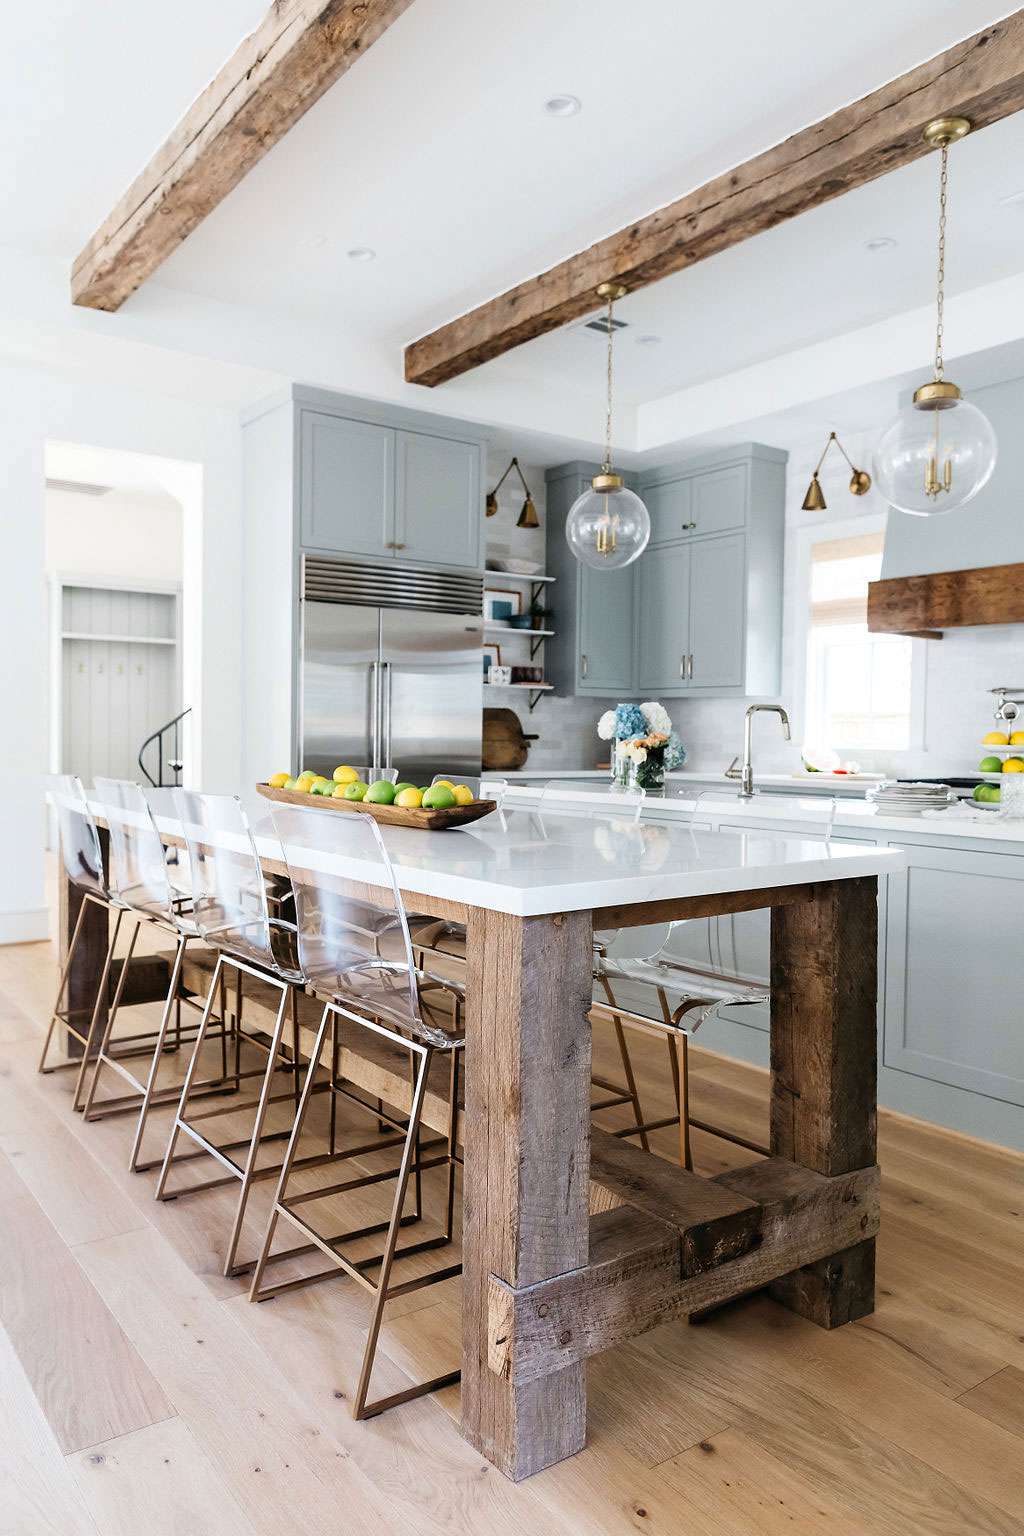 20 Designer Favorite Paint Color Ideas To Give Your Kitchen ...